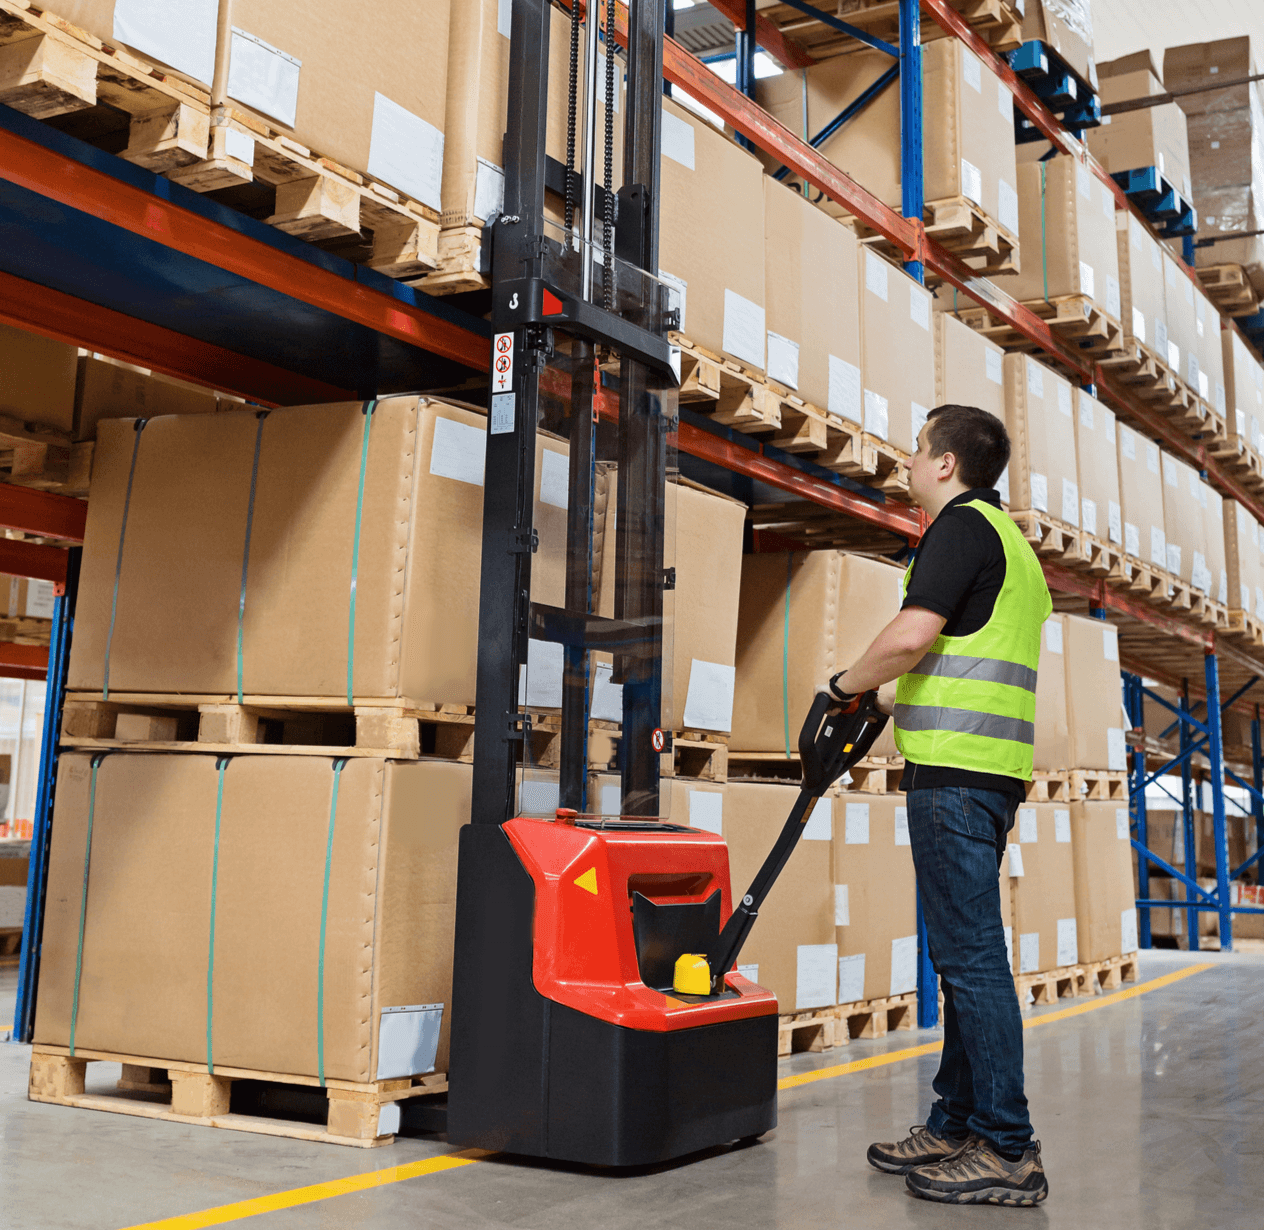 Man using forklift in a warehouse.